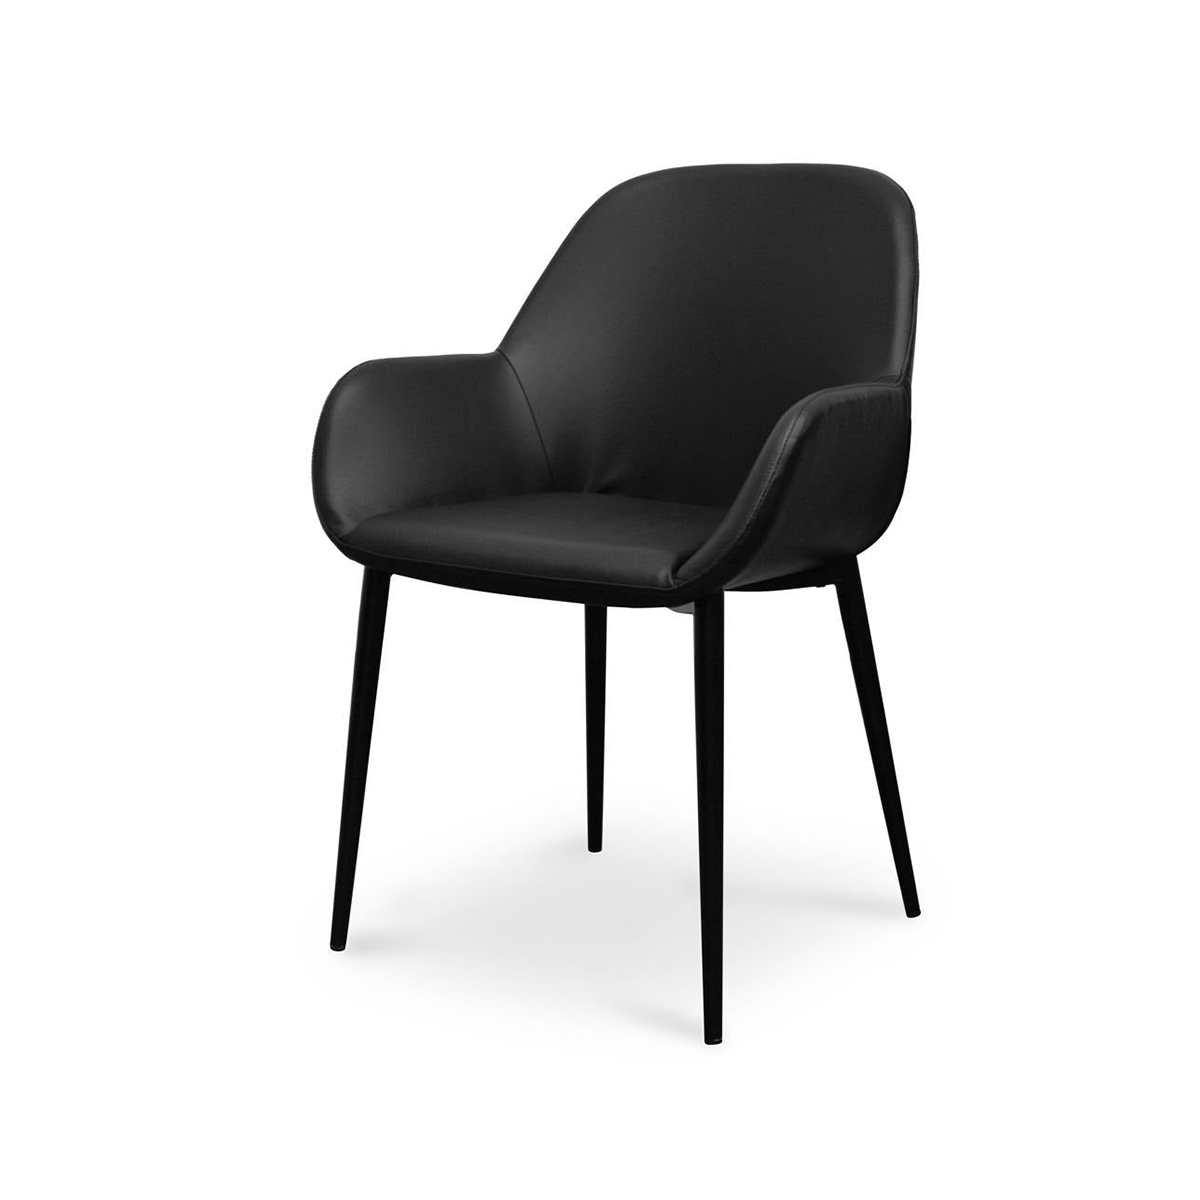 Scandinavian Upholstered Dining Chair - FondHouse Dale Chair(Black PU)